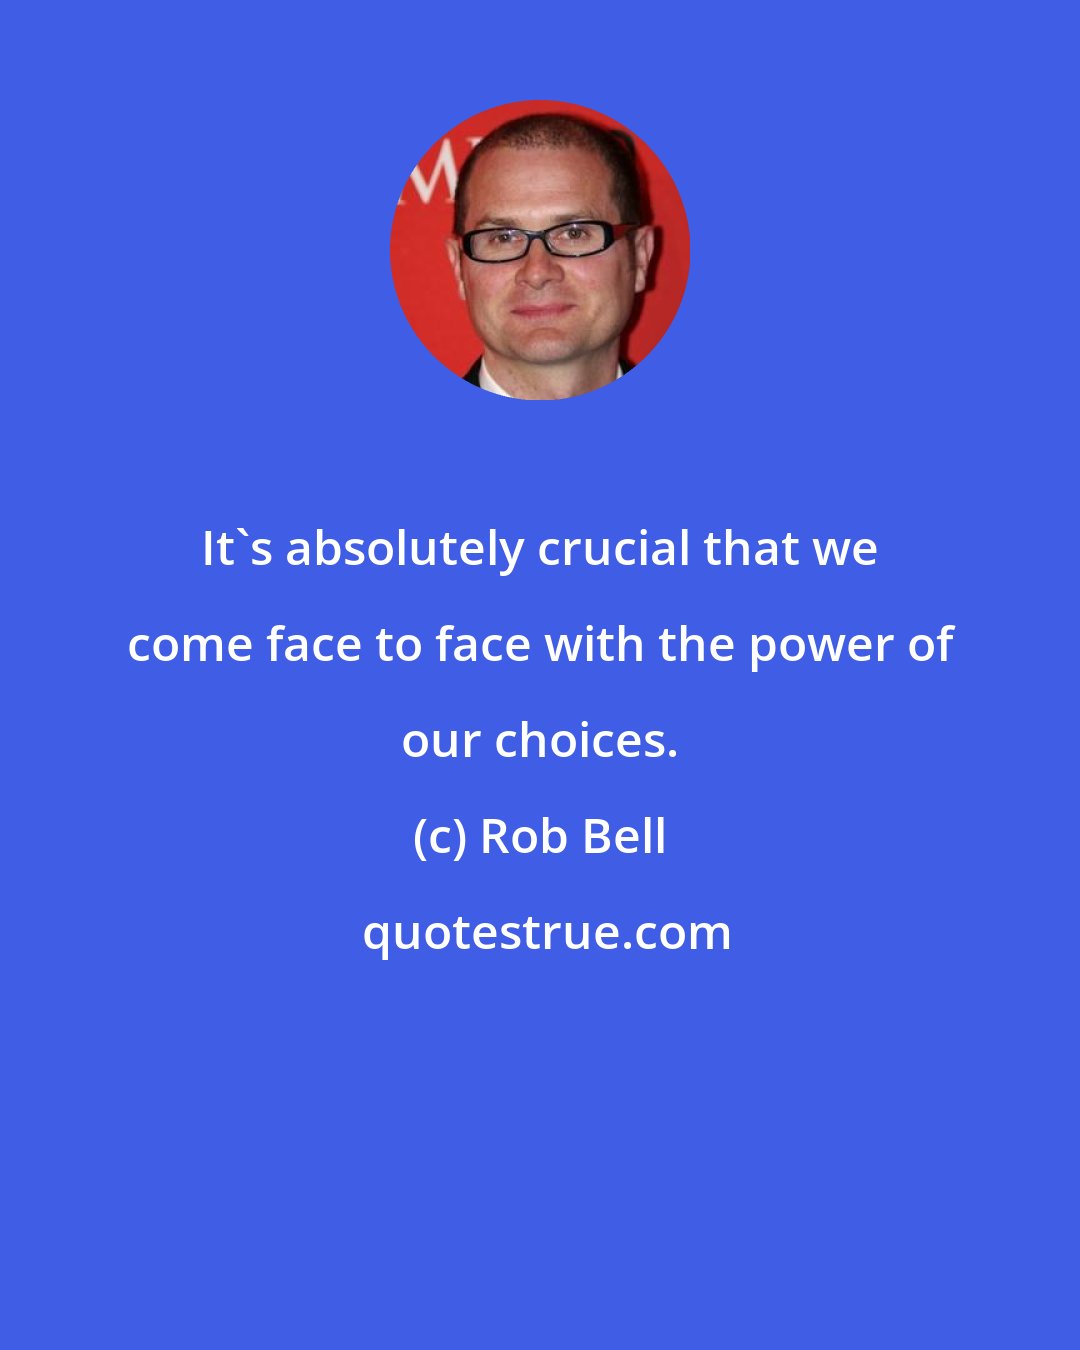 Rob Bell: It's absolutely crucial that we come face to face with the power of our choices.